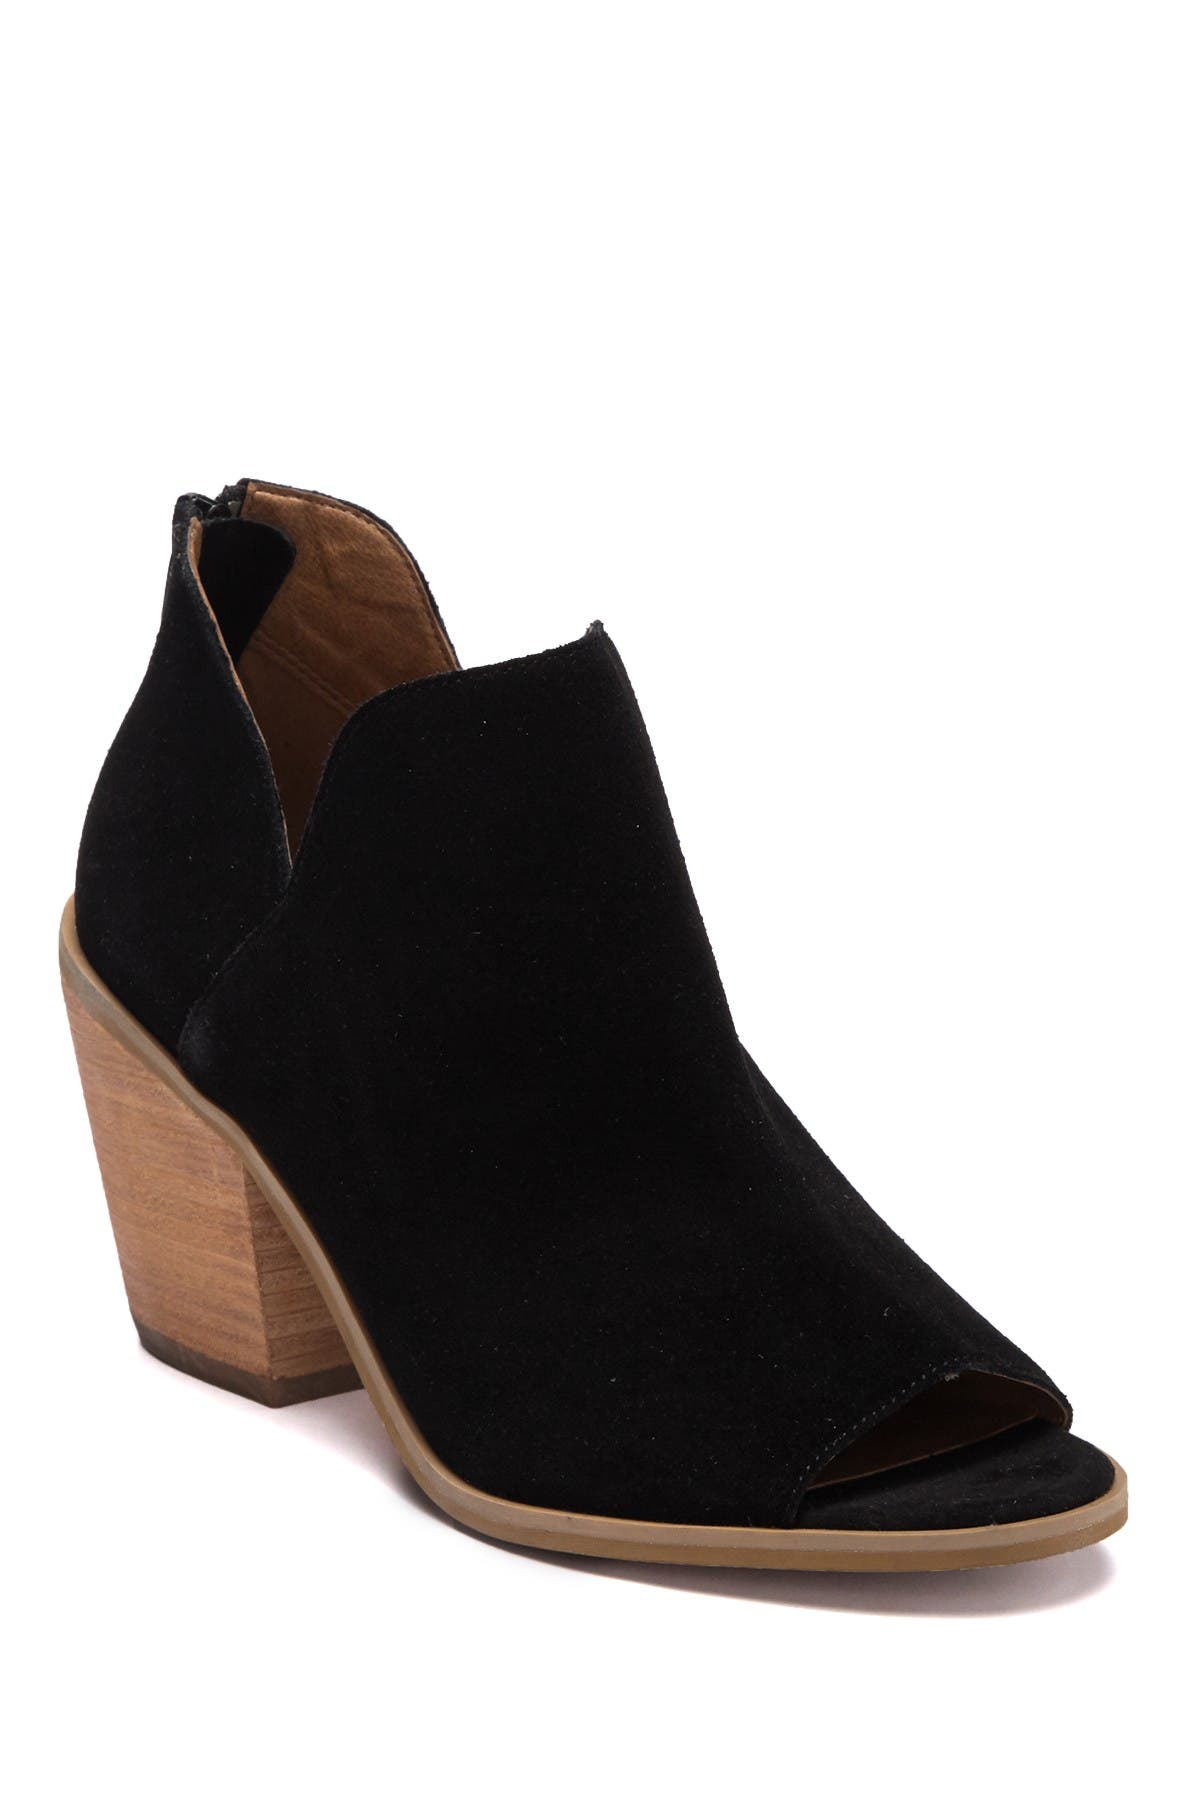 susina ridlee suede bootie